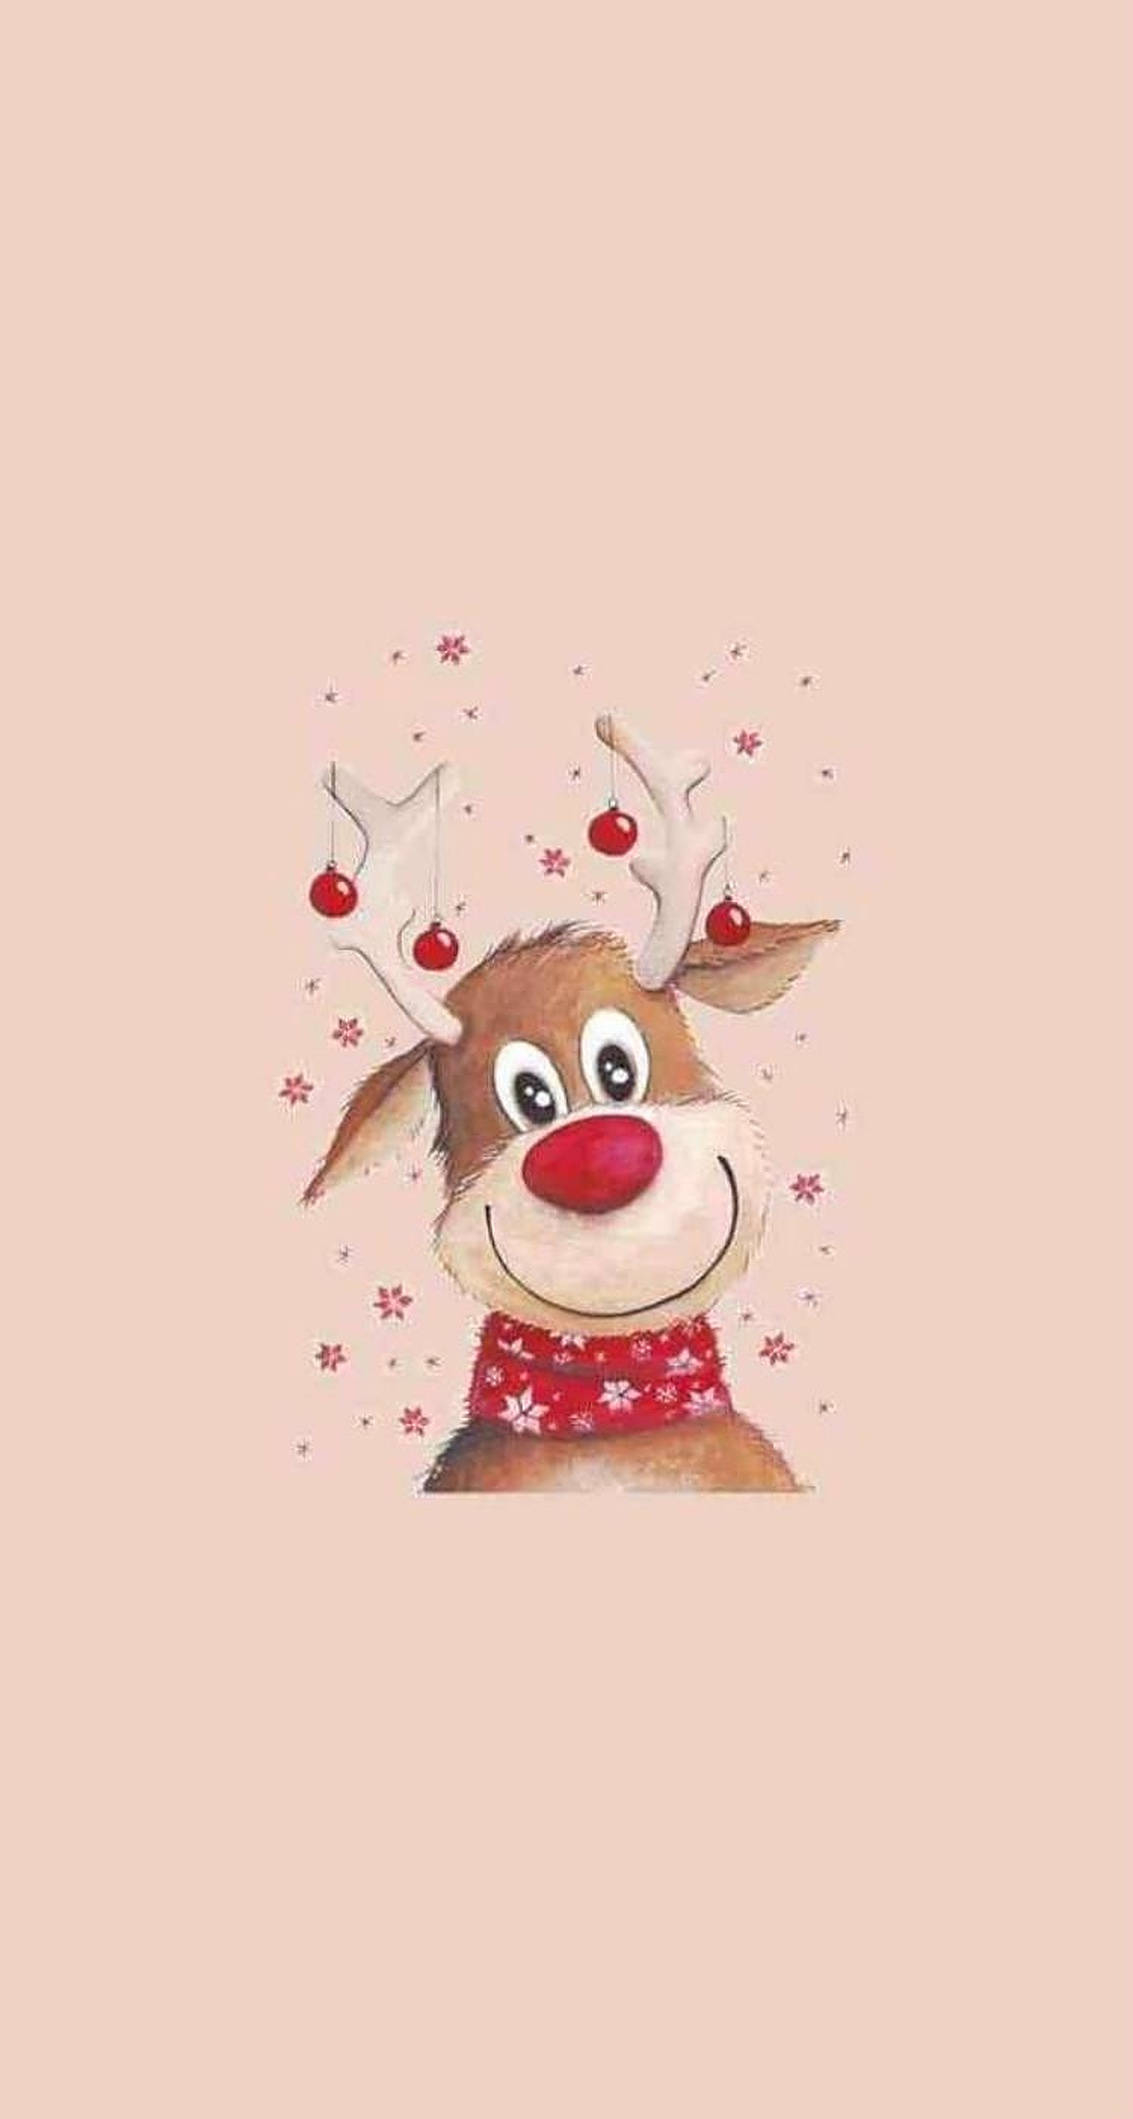 1133x2119 Download Cute Christmas Reindeer With Scarf Wallpaper